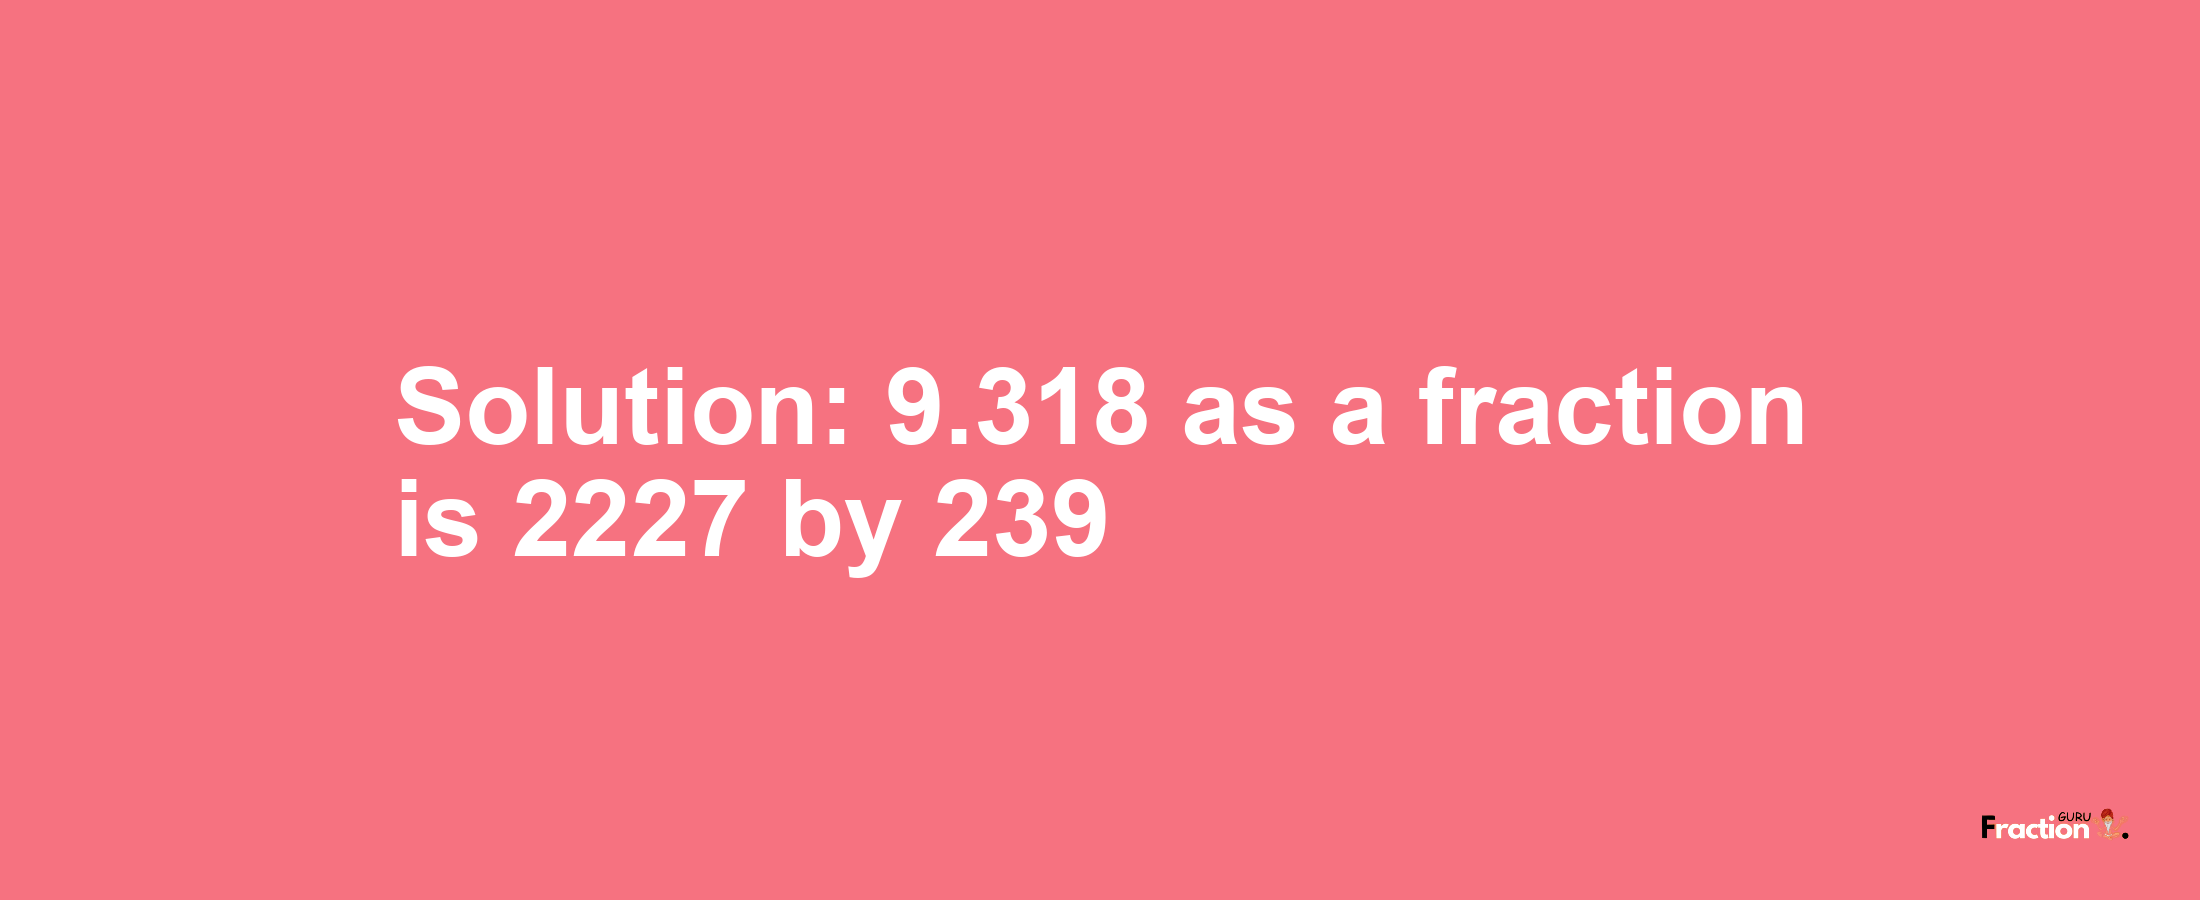 Solution:9.318 as a fraction is 2227/239